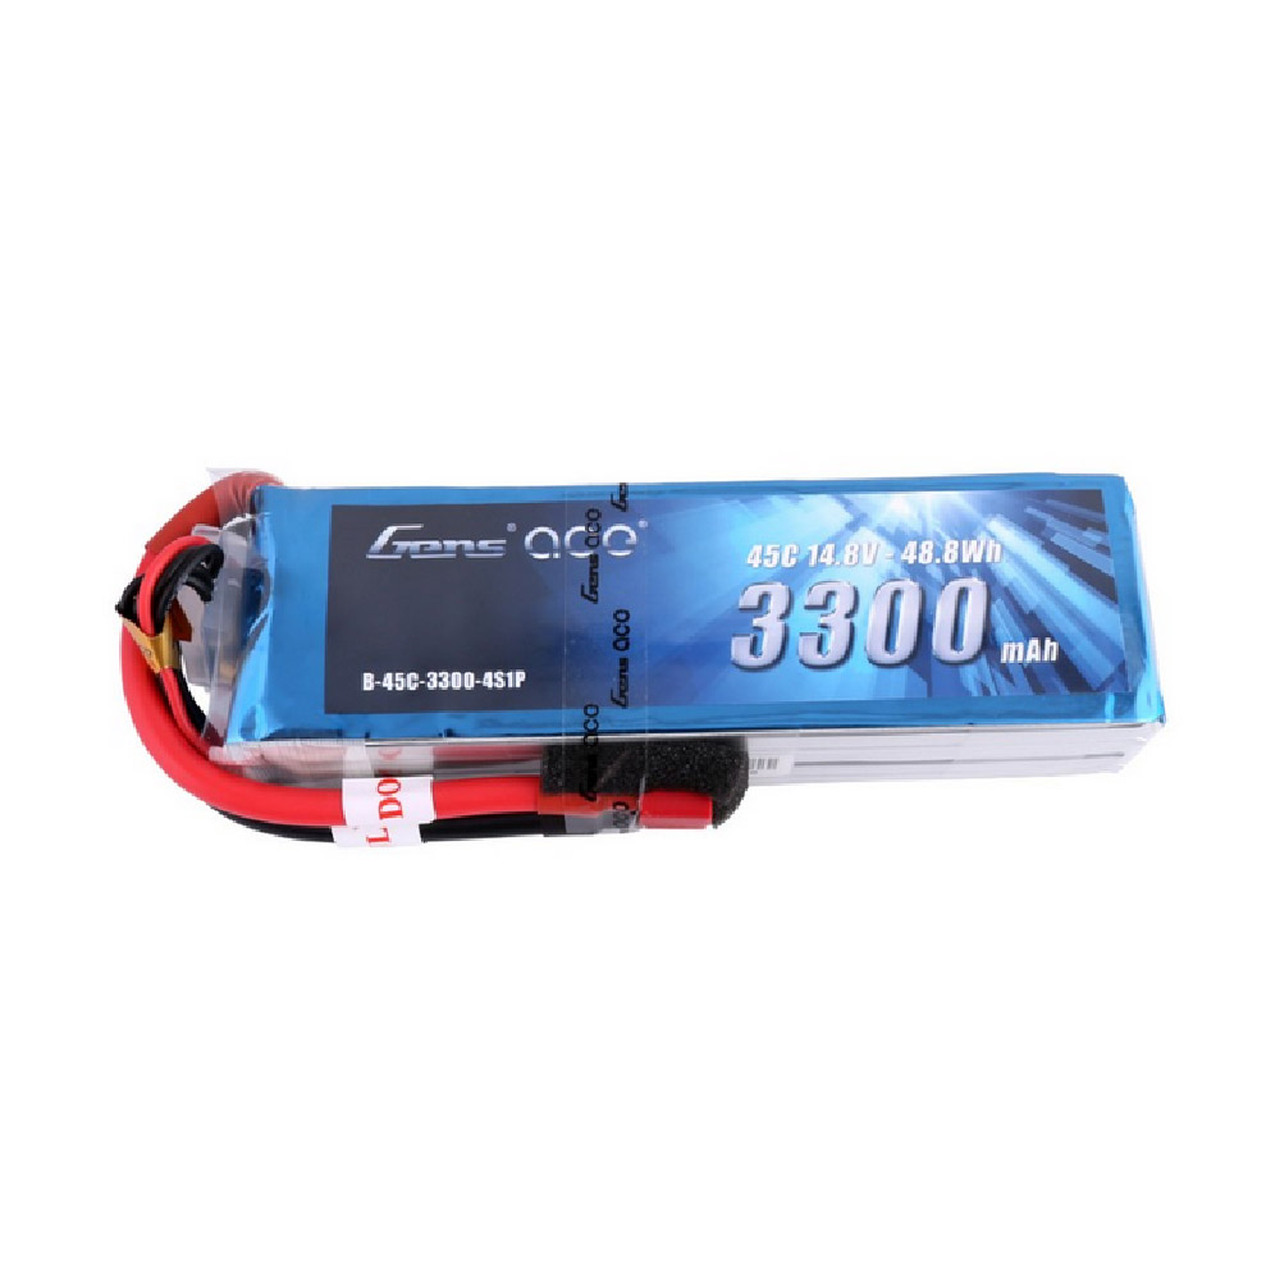 Gens ace 3300mAh 14.8V 45C 4S1P Lipo Battery Pack with Deans Plug